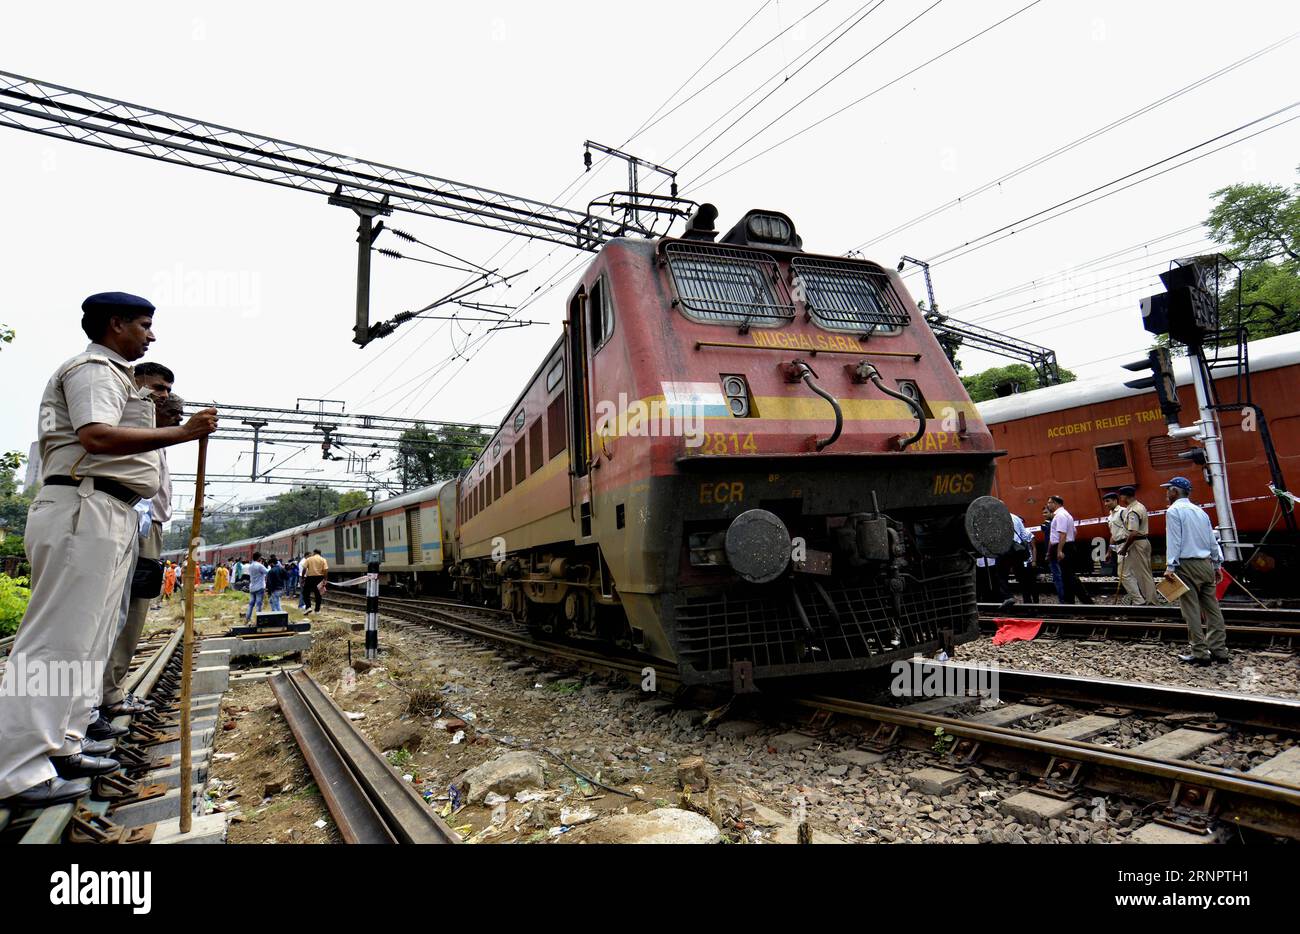 (170907) -- NEW DELHI, Sept. 7, 2017 () -- Photo taken on Sept. 7, 2017 shows a train accident site in New Delhi, India. A high-speed passenger train derailed in the Indian capital Thursday, railway officials said. The derailment of Delhi-bound Rajdhani Express from the eastern city of Ranchi took place around 12:00 p.m. local time, causing no casualties. (/stringer) INDIA-NEW DELHI-TRAIN-ACCIDENT Xinhua PUBLICATIONxNOTxINxCHN Stock Photo